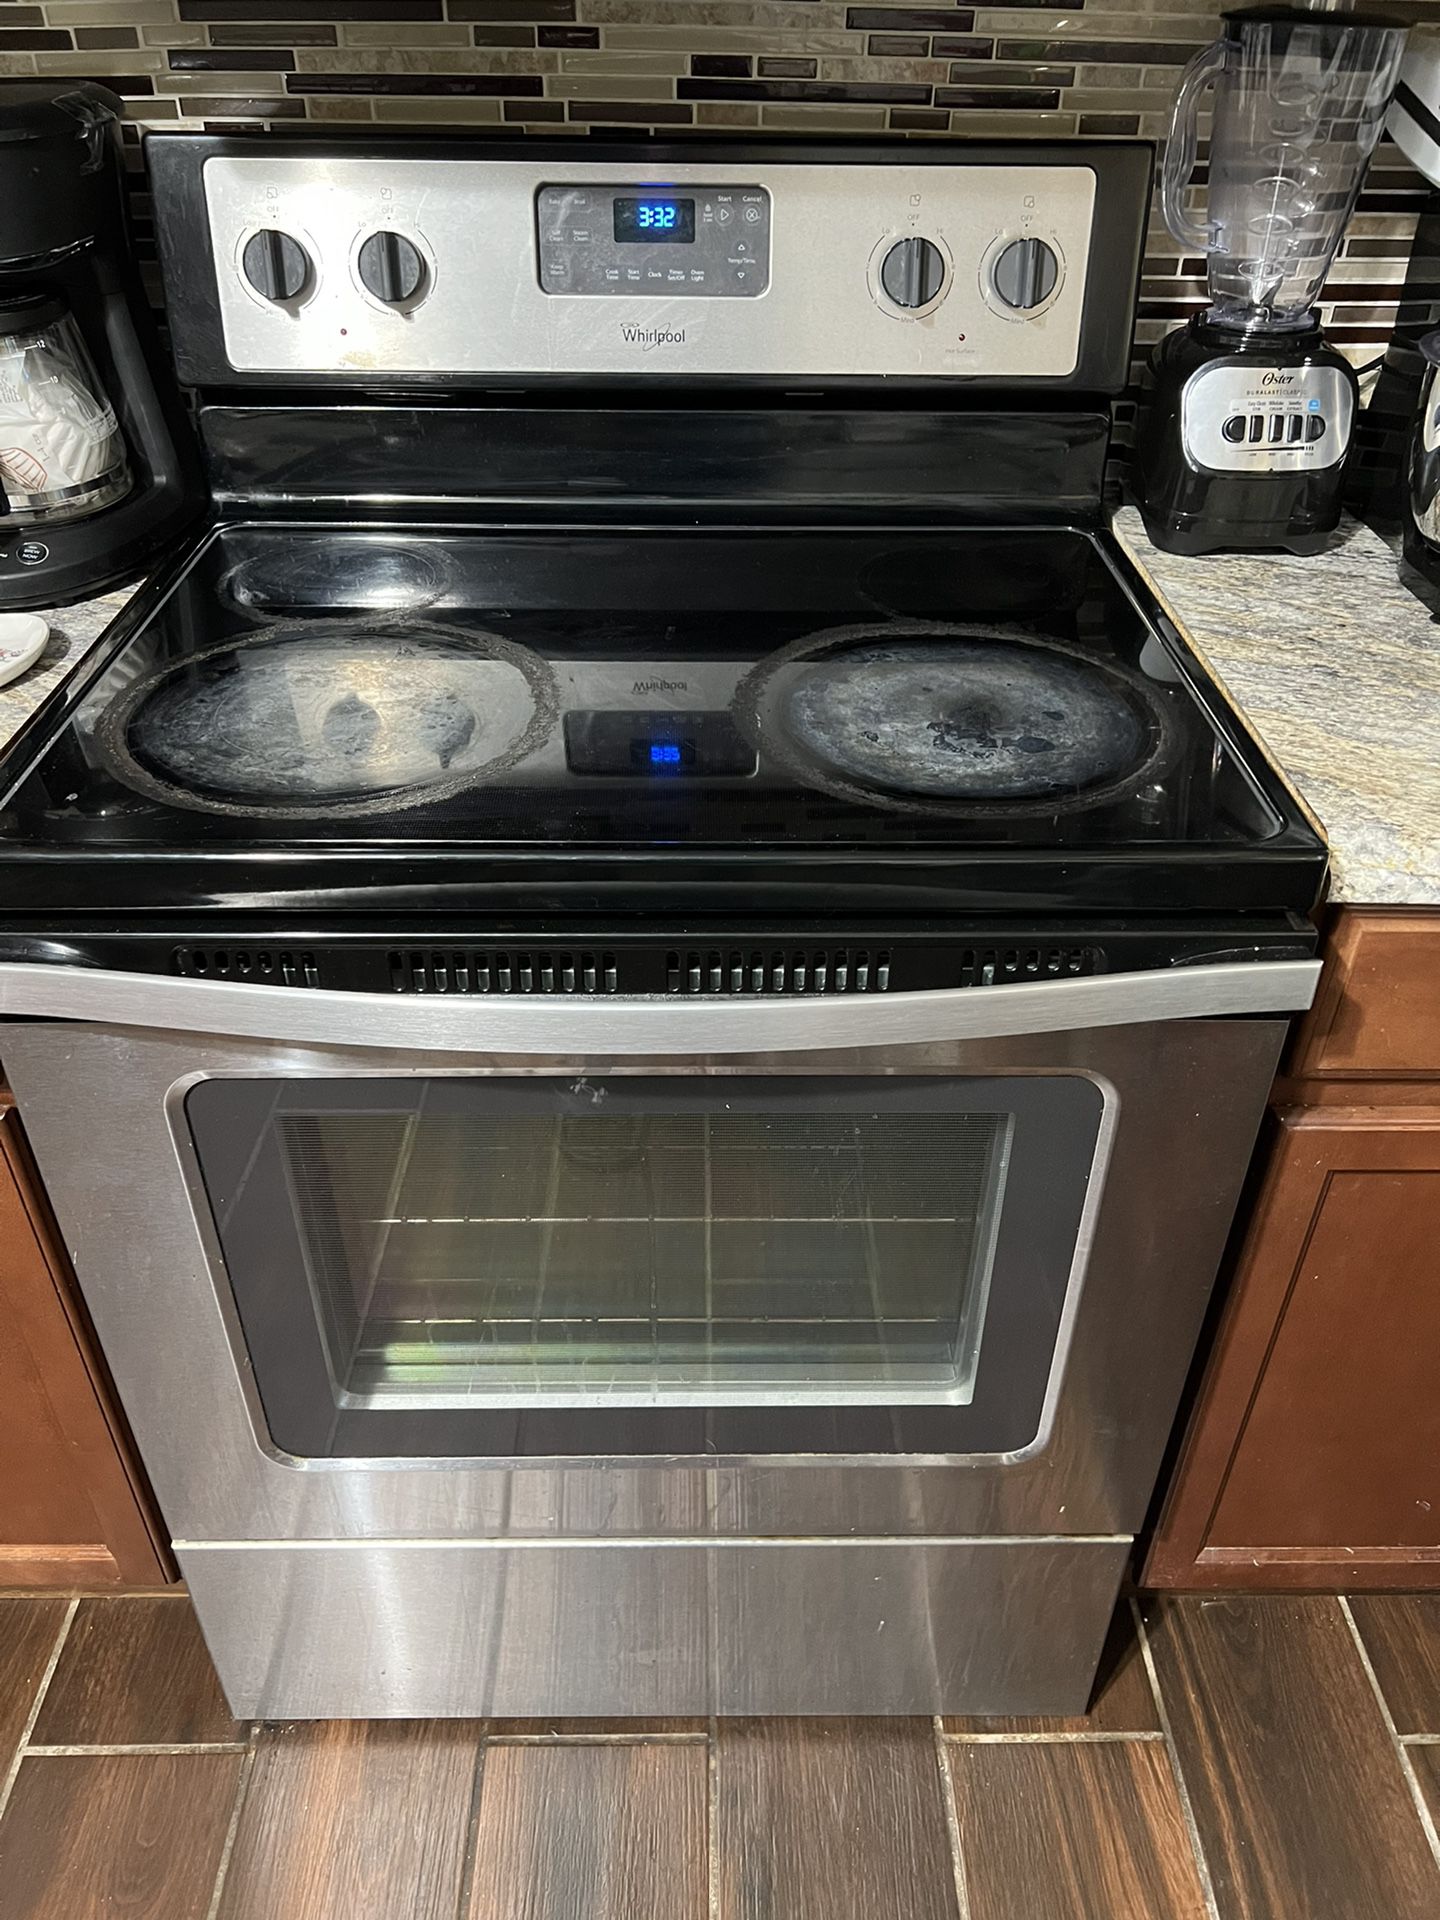 Free Whirlpool Ceramic Stove And Oven!